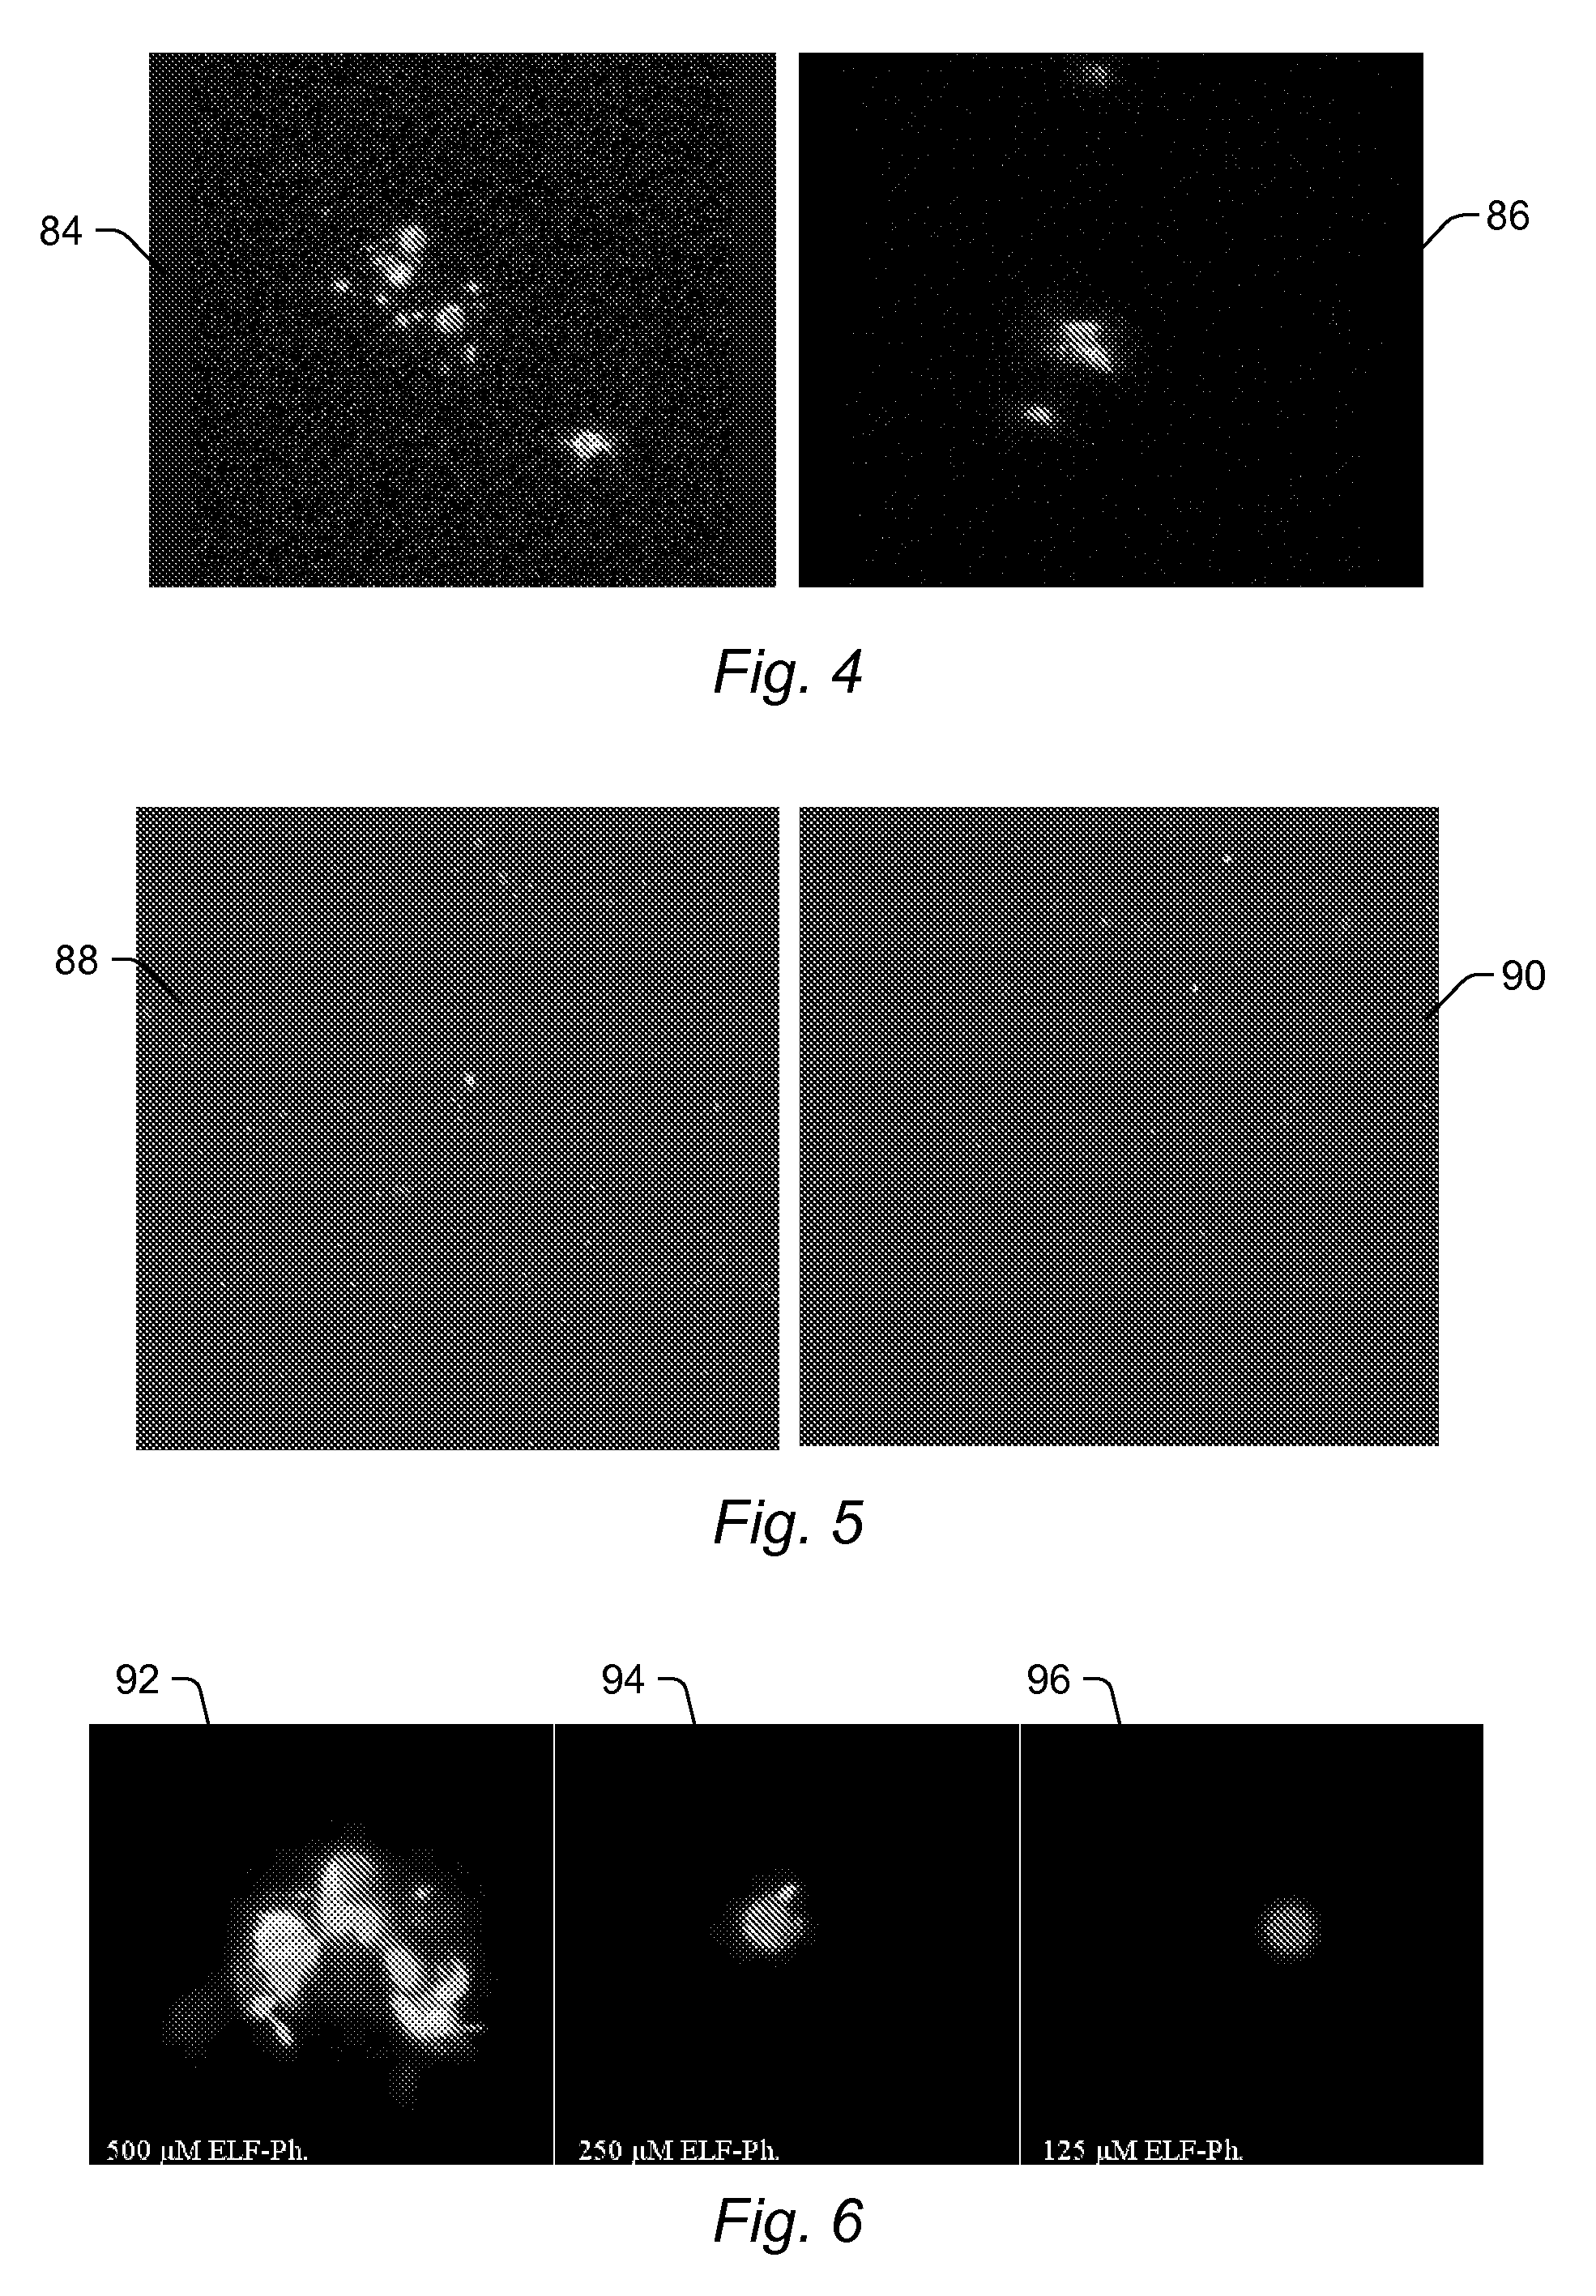 Methods, Products, and Kits for Identifying an Analyte in a Sample